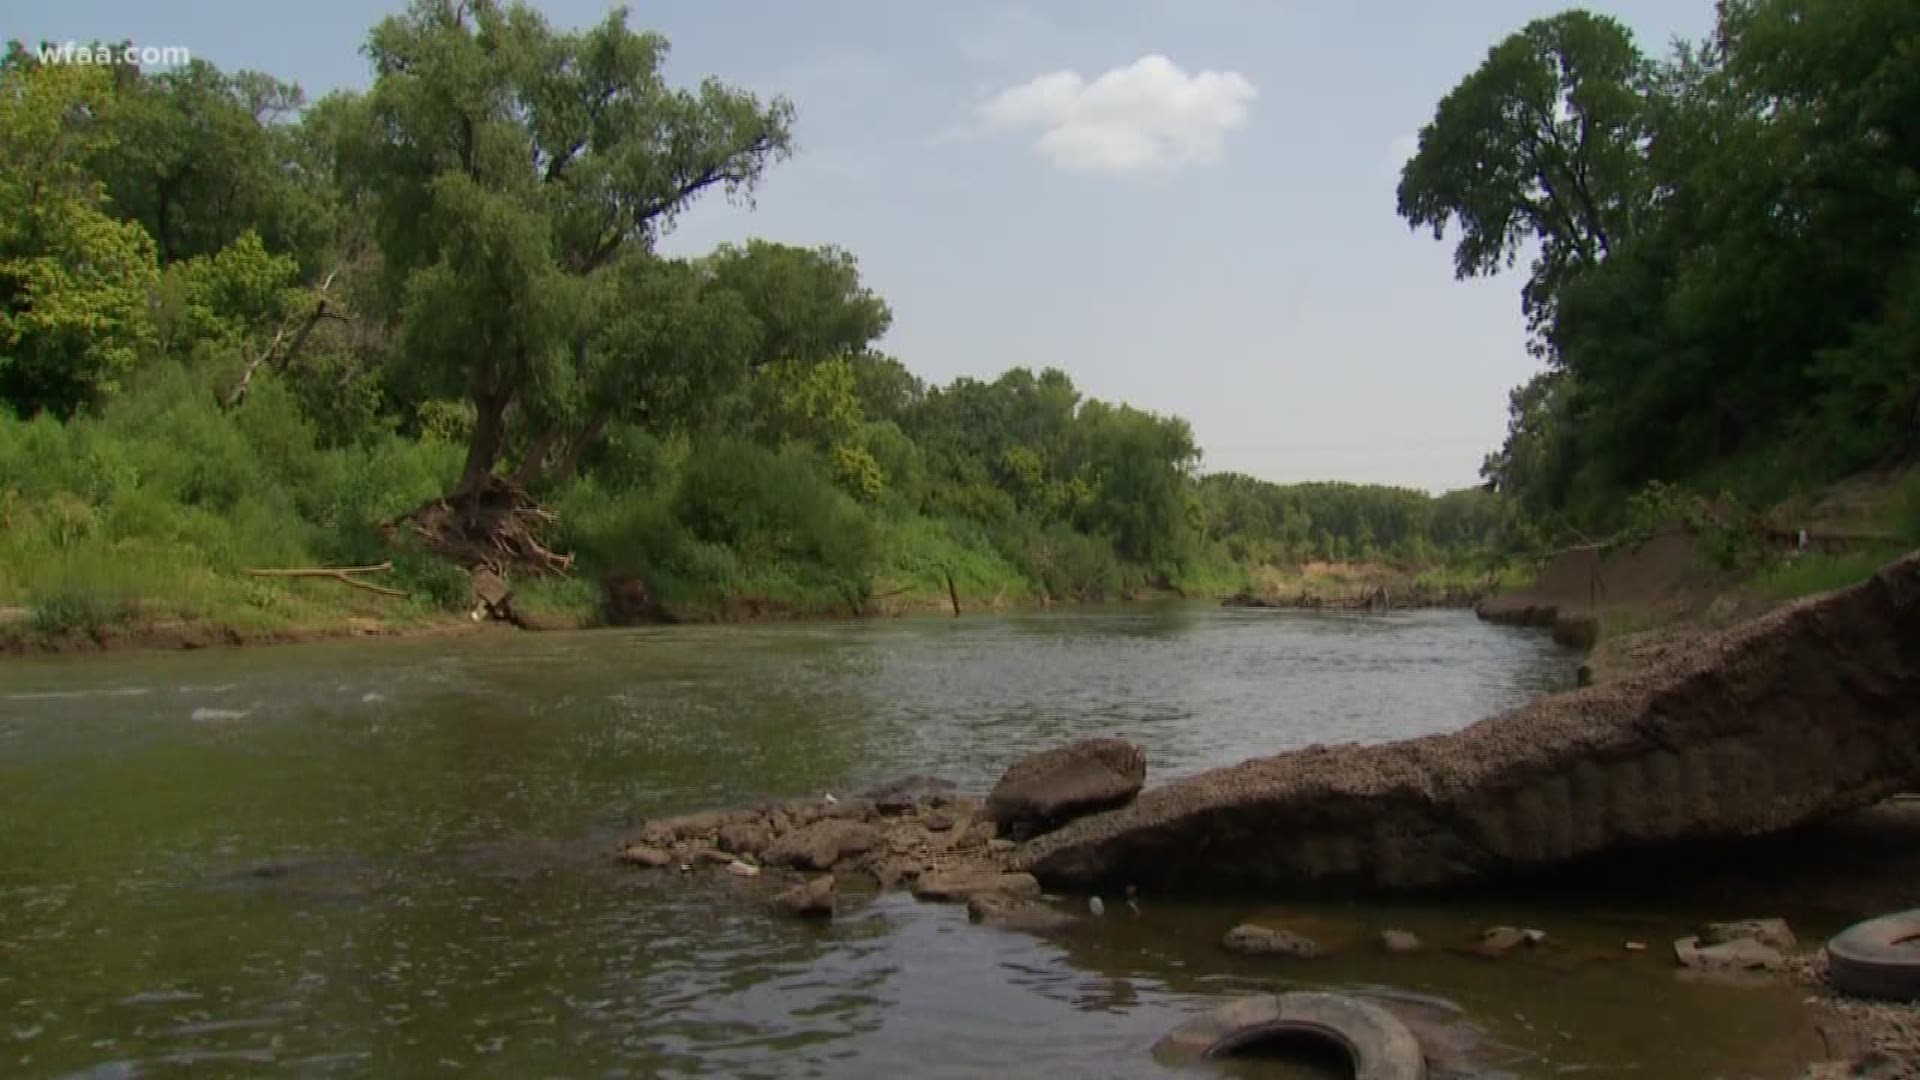 Dallas police officer rescues boy from river